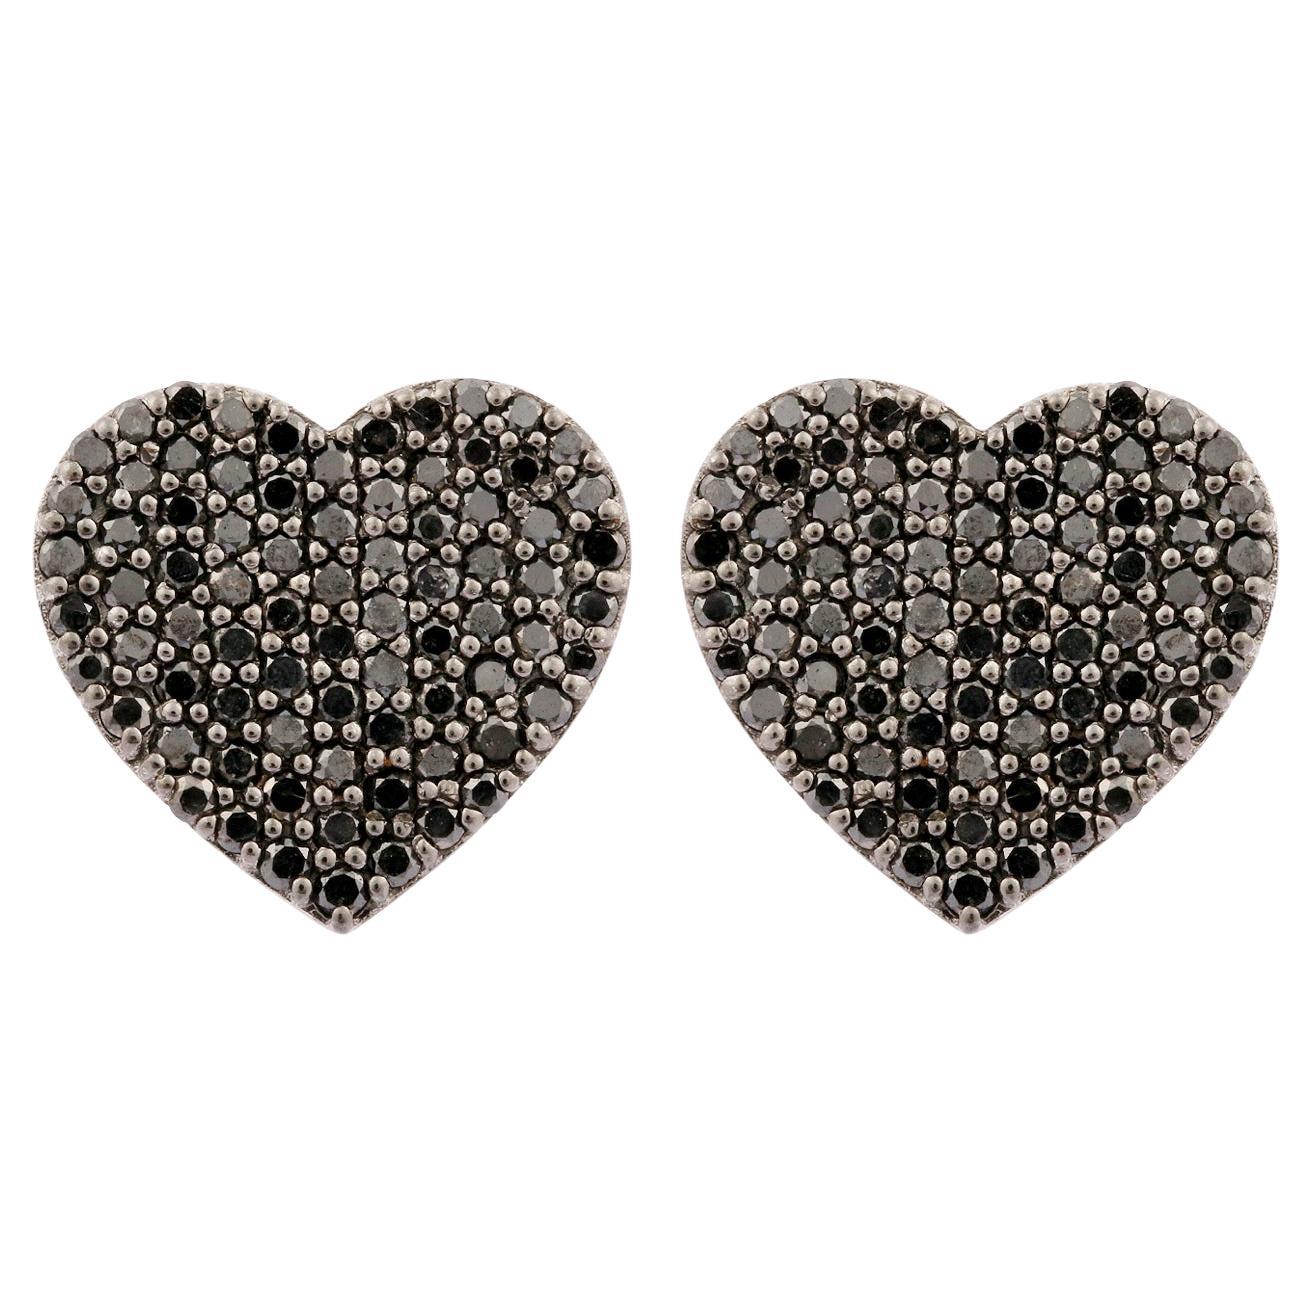 Natural Black Diamond 1.23cts in 18k Gold 3.48gms Earring